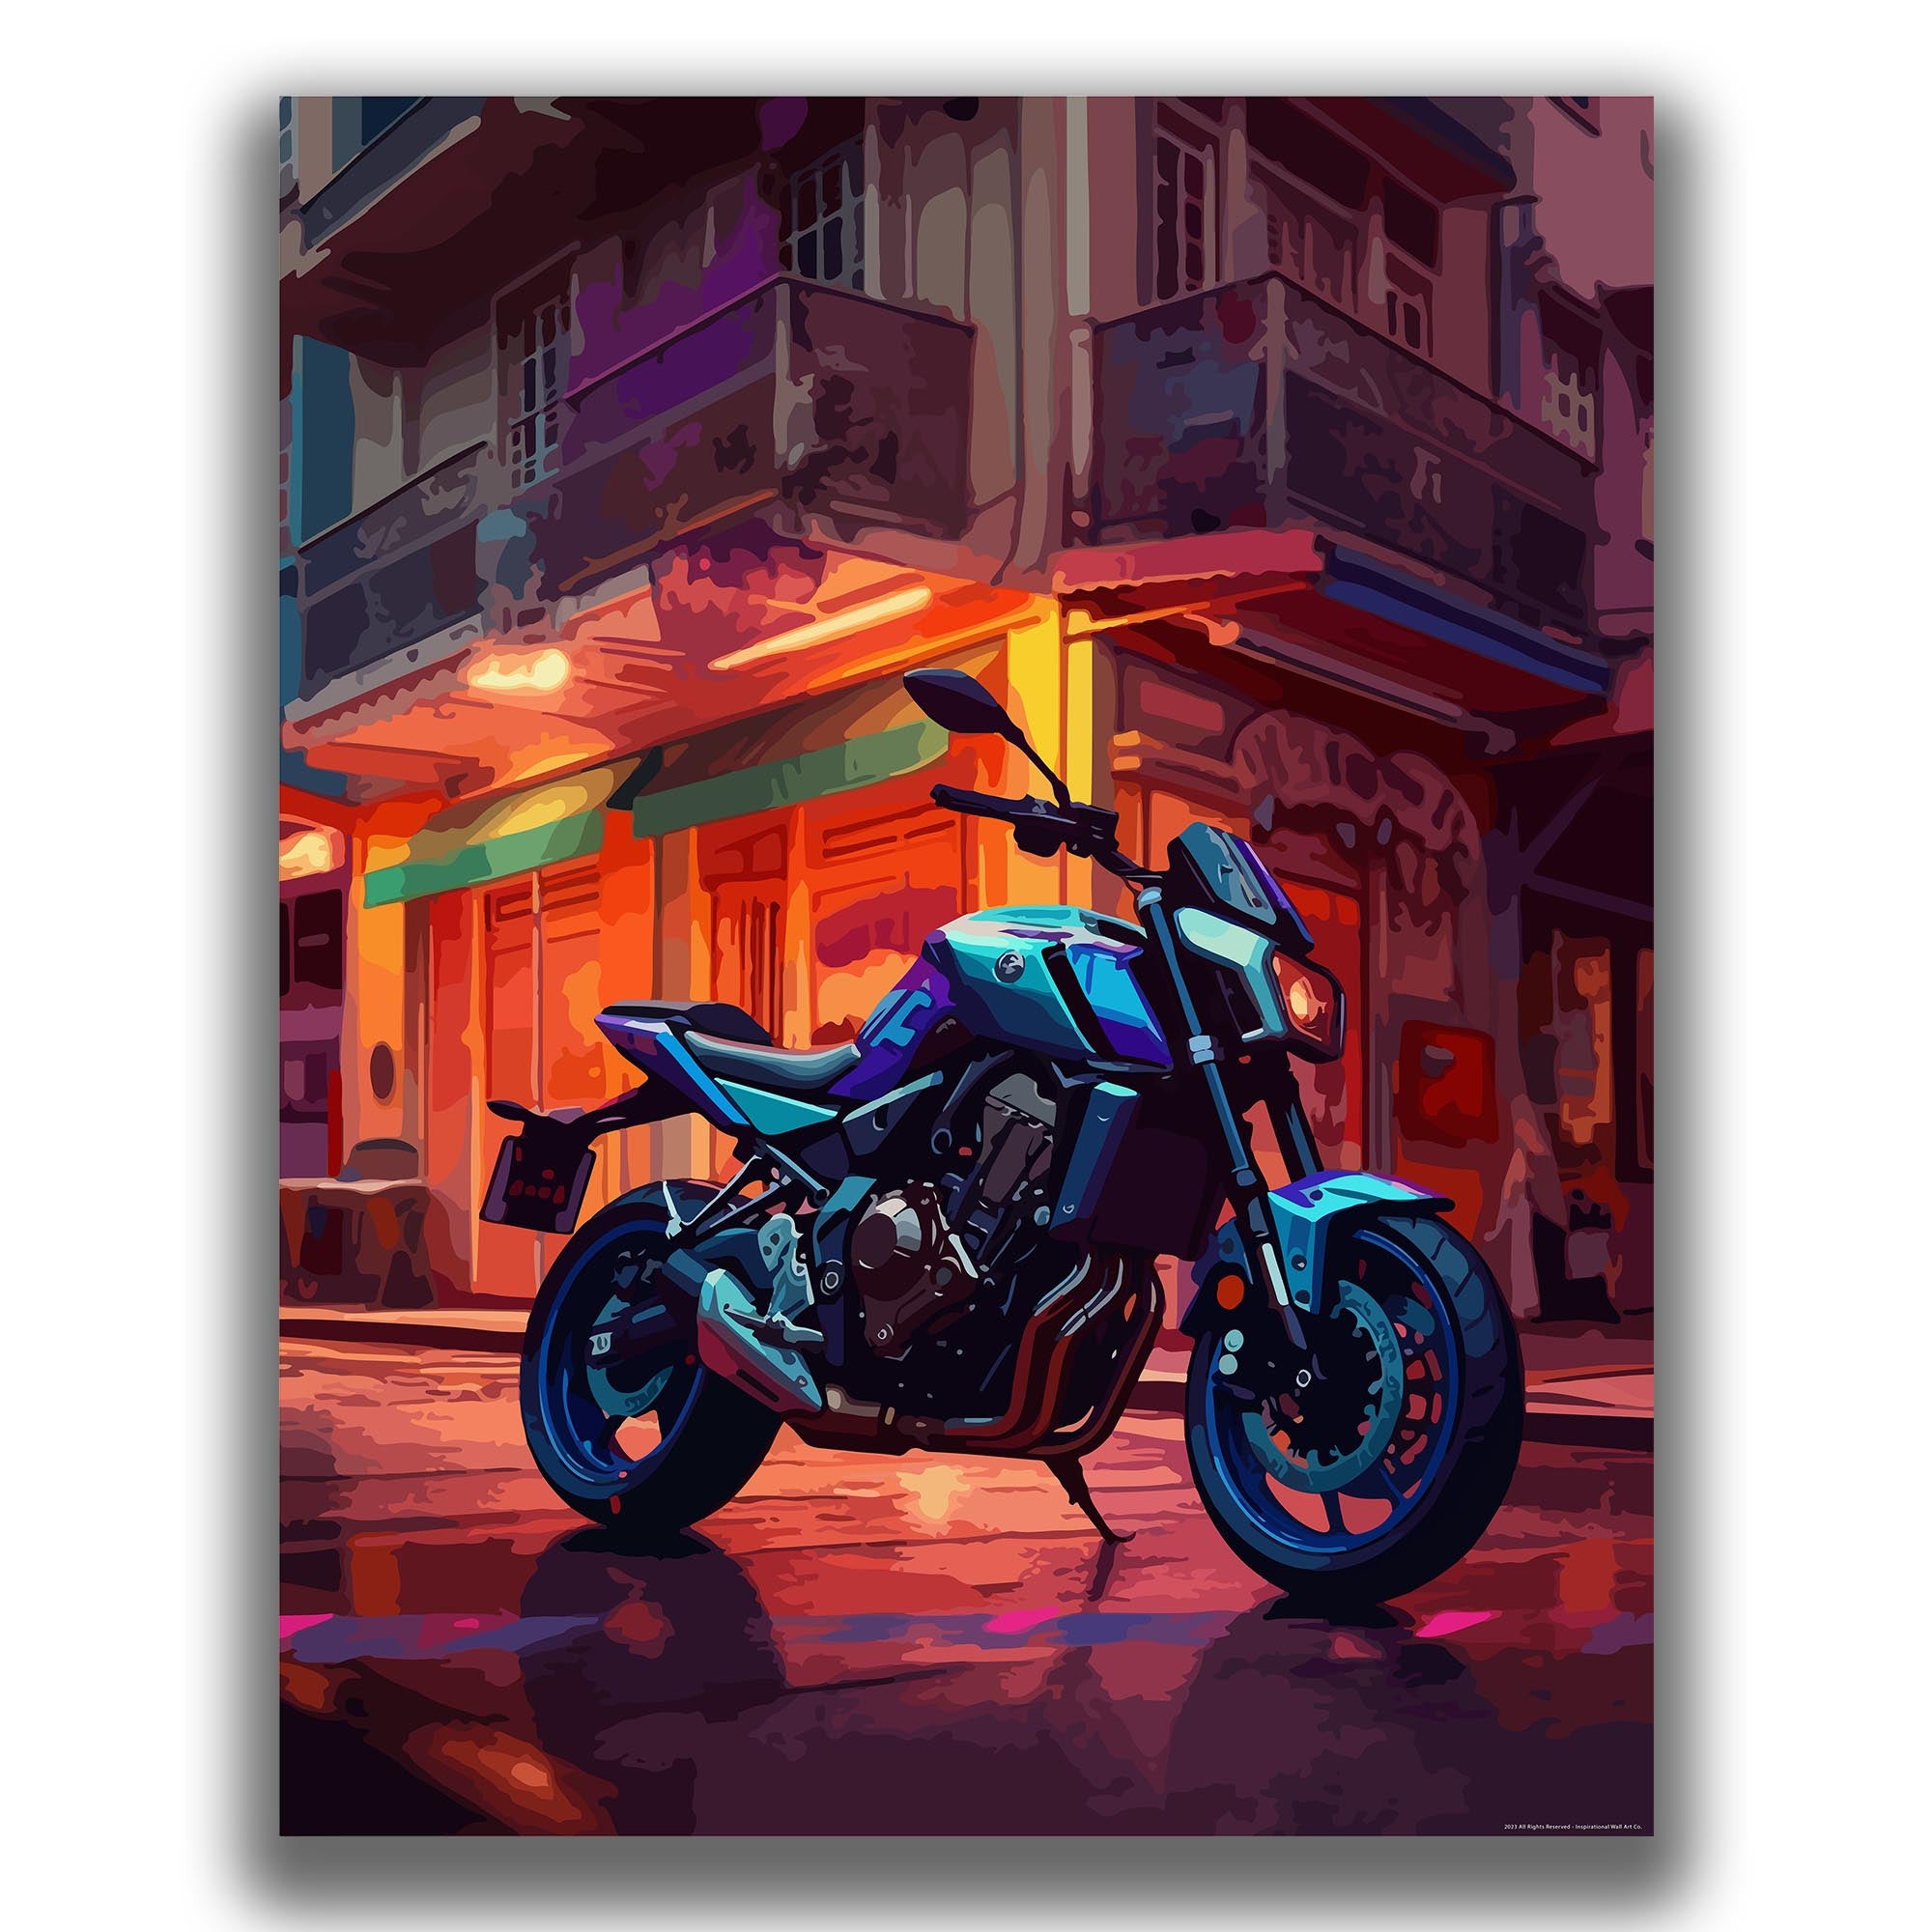 Furious - Motorcycle Poster